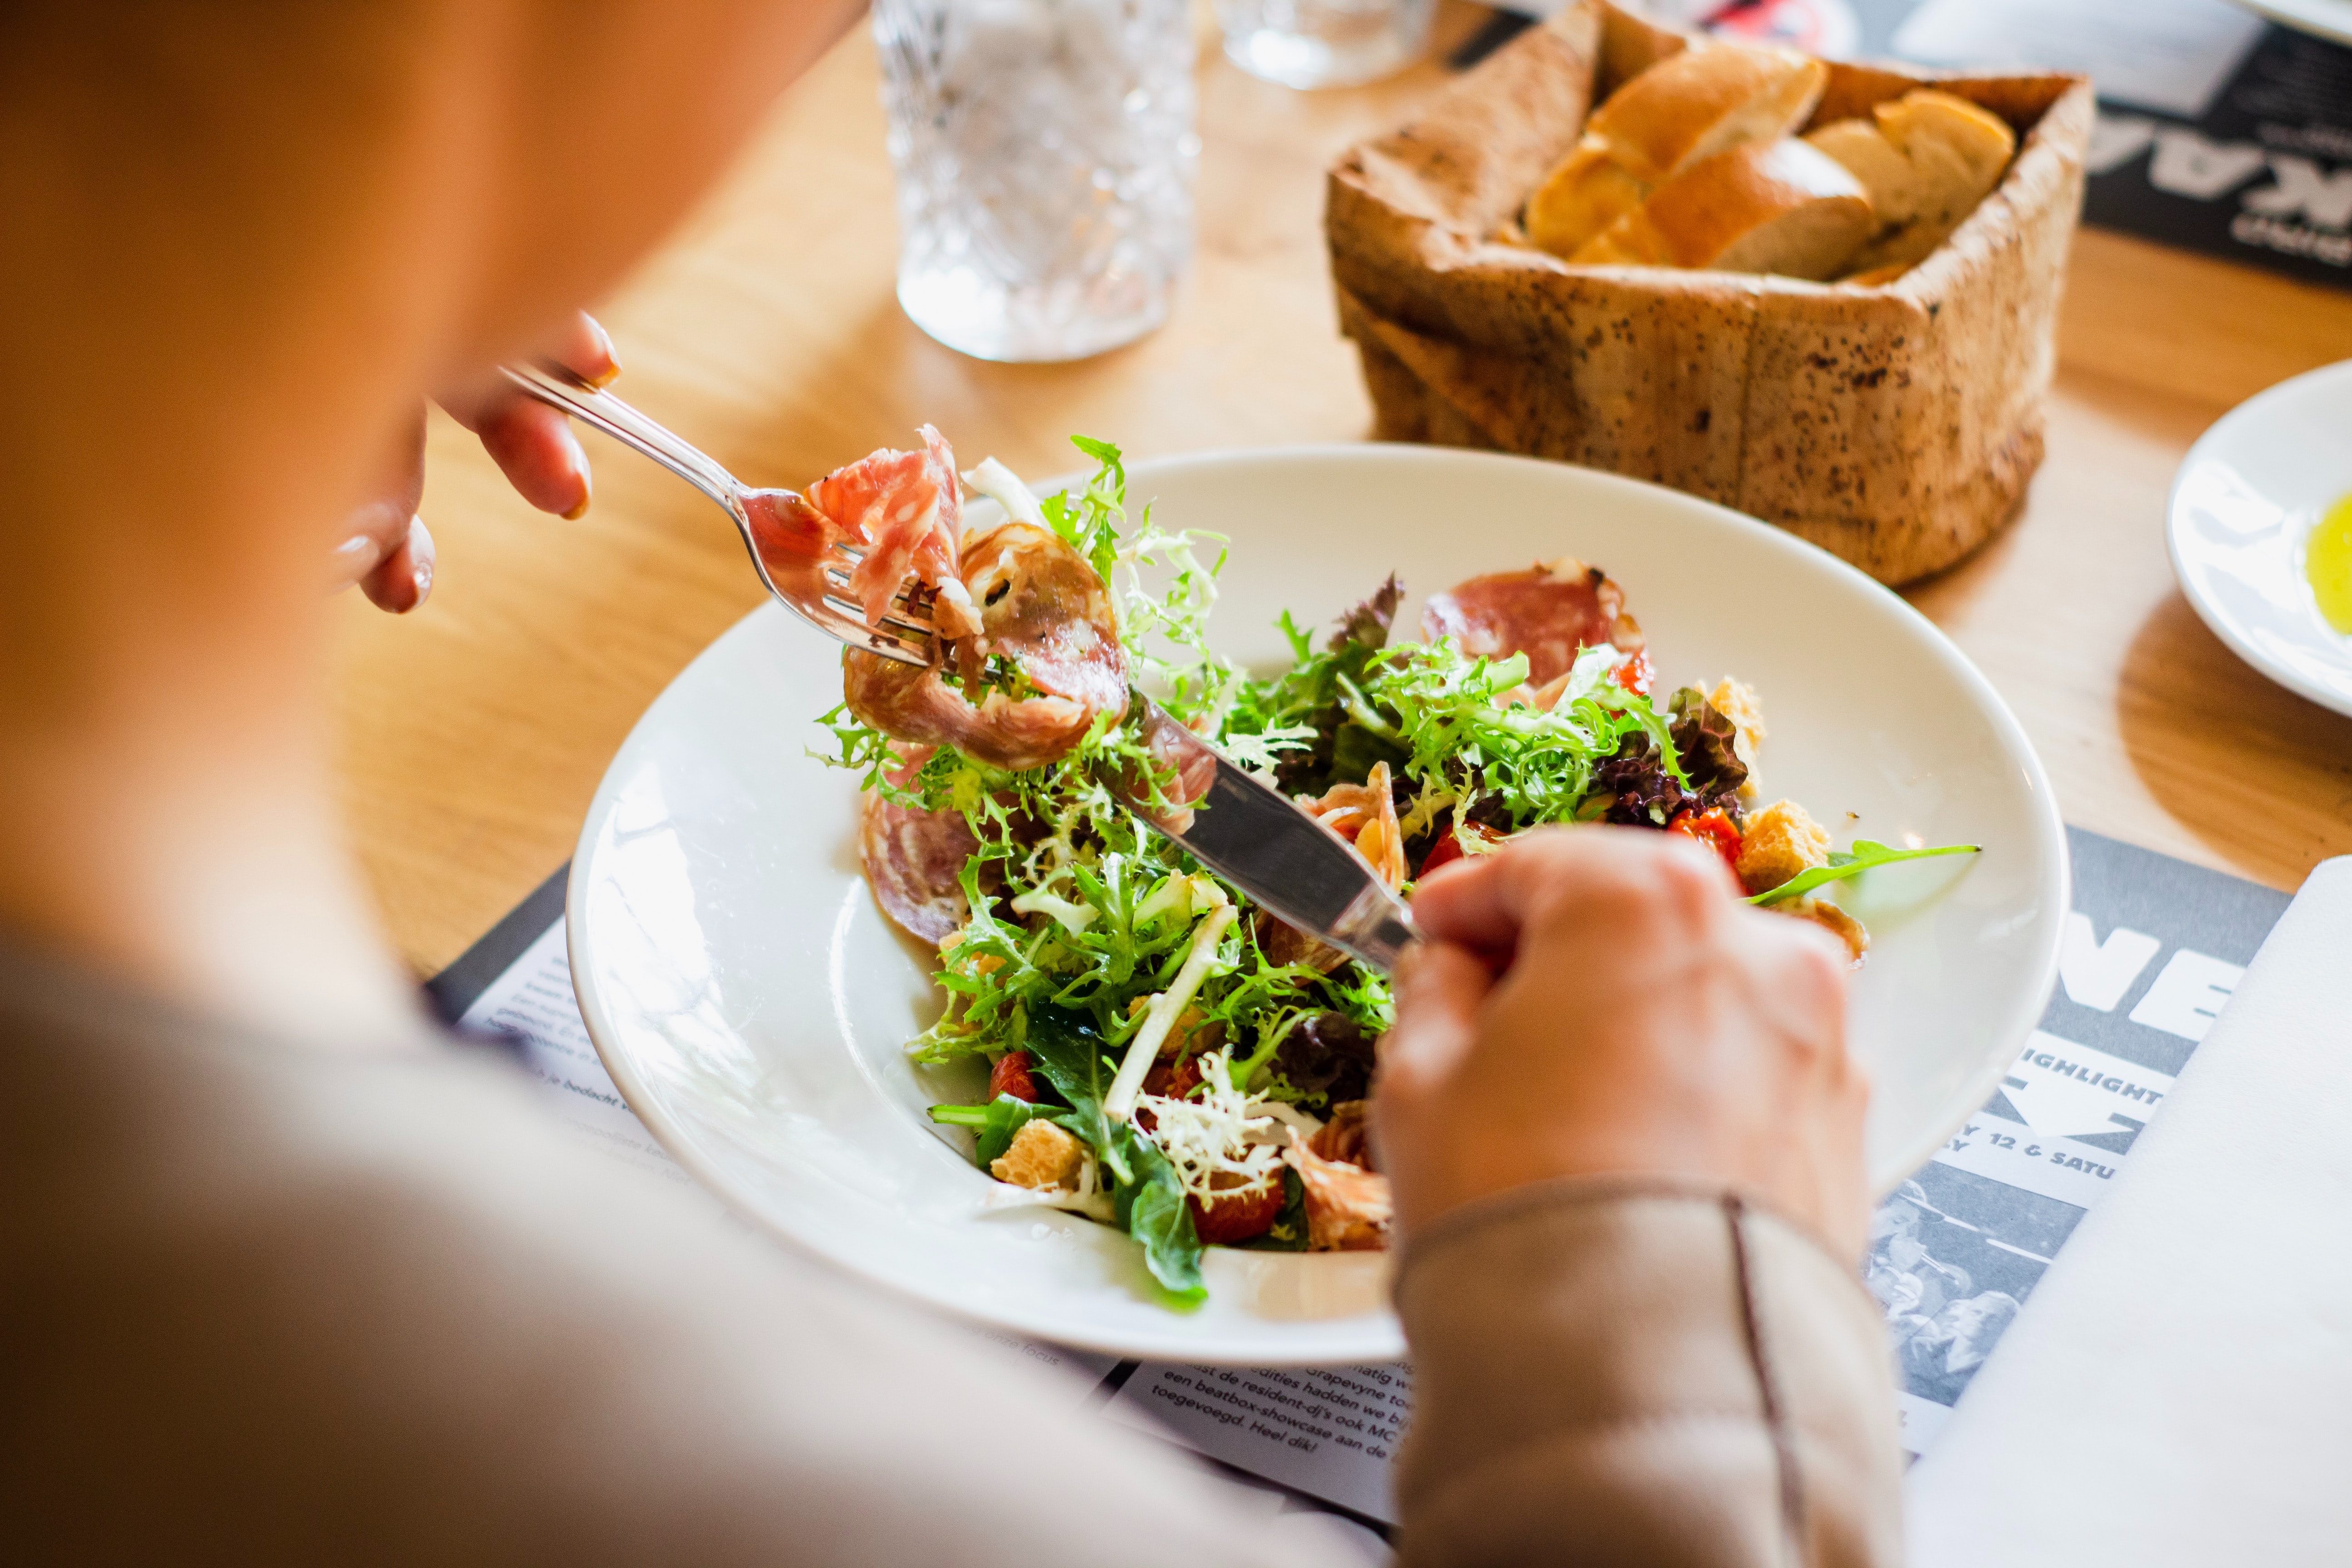 Alt: A person eating a dish with greens. Image courtesy of Unsplash, by Louis Hansel.